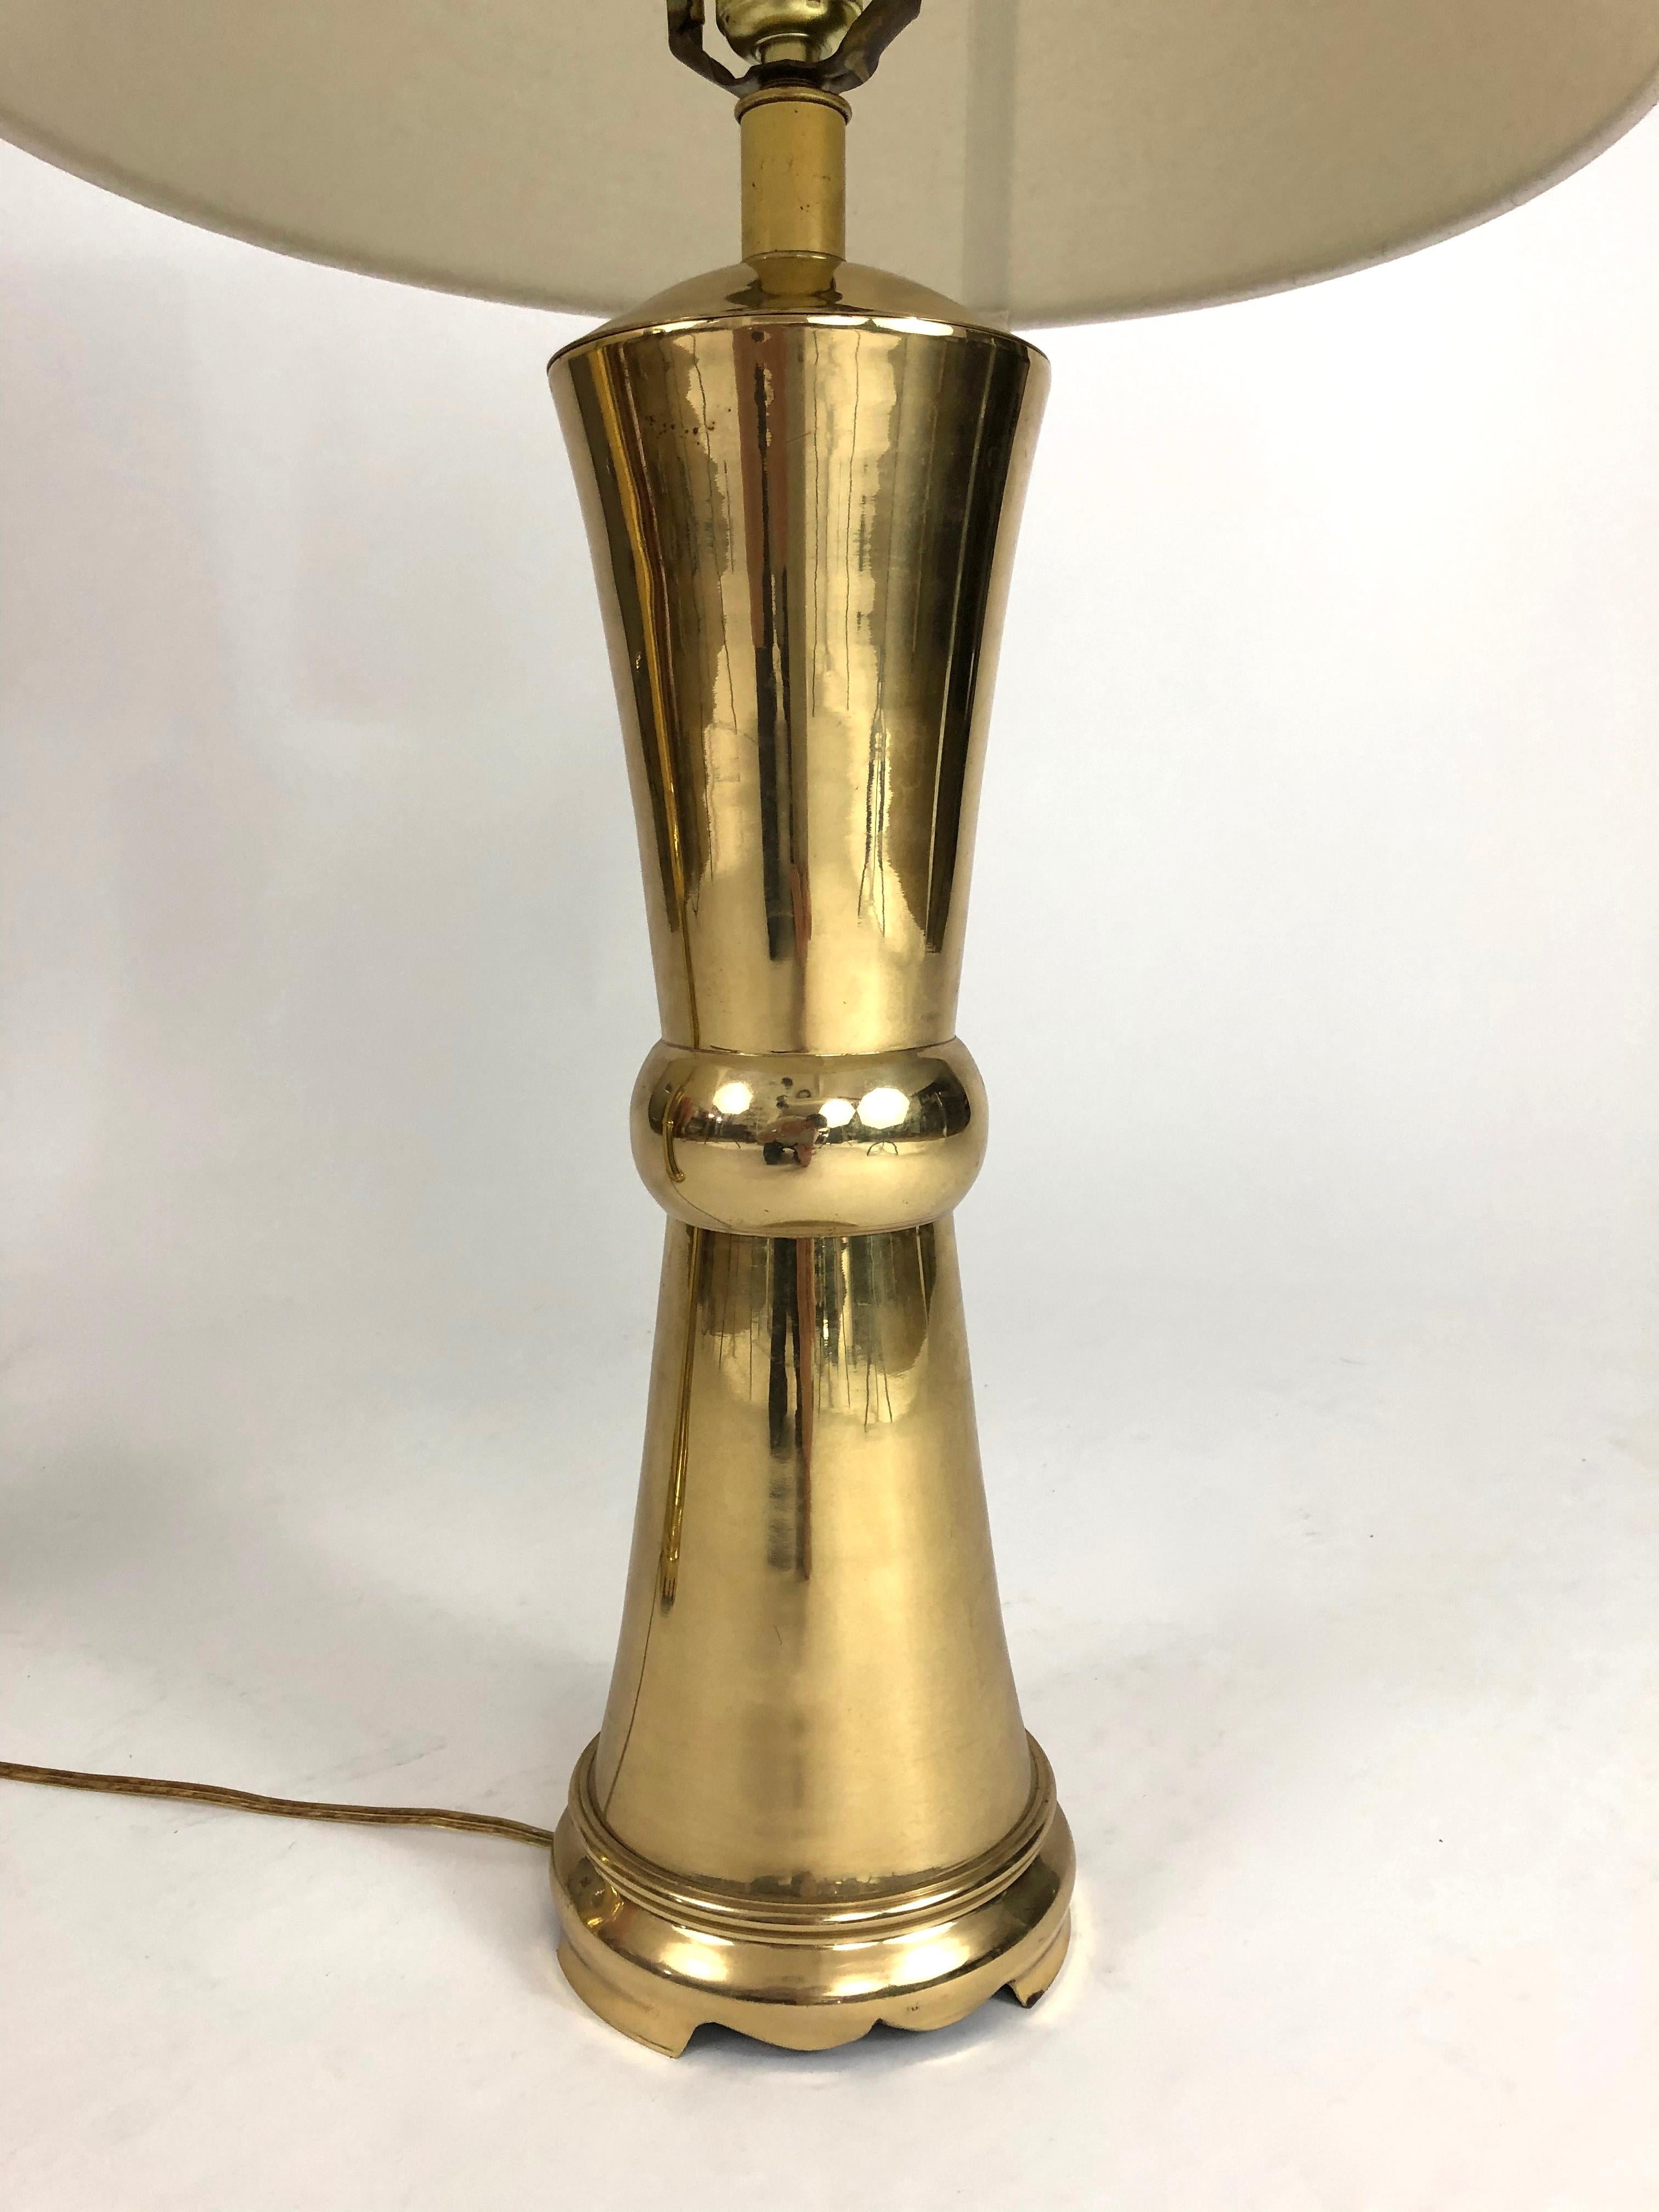 A pair of high quality, vintage solid brass lamps in the manner of James Mont and made by Frederick Cooper, Chicago. The form is inspired by an ancient Asian metal form, cylindrical with tapering top and bottom and a band around the middle, raised